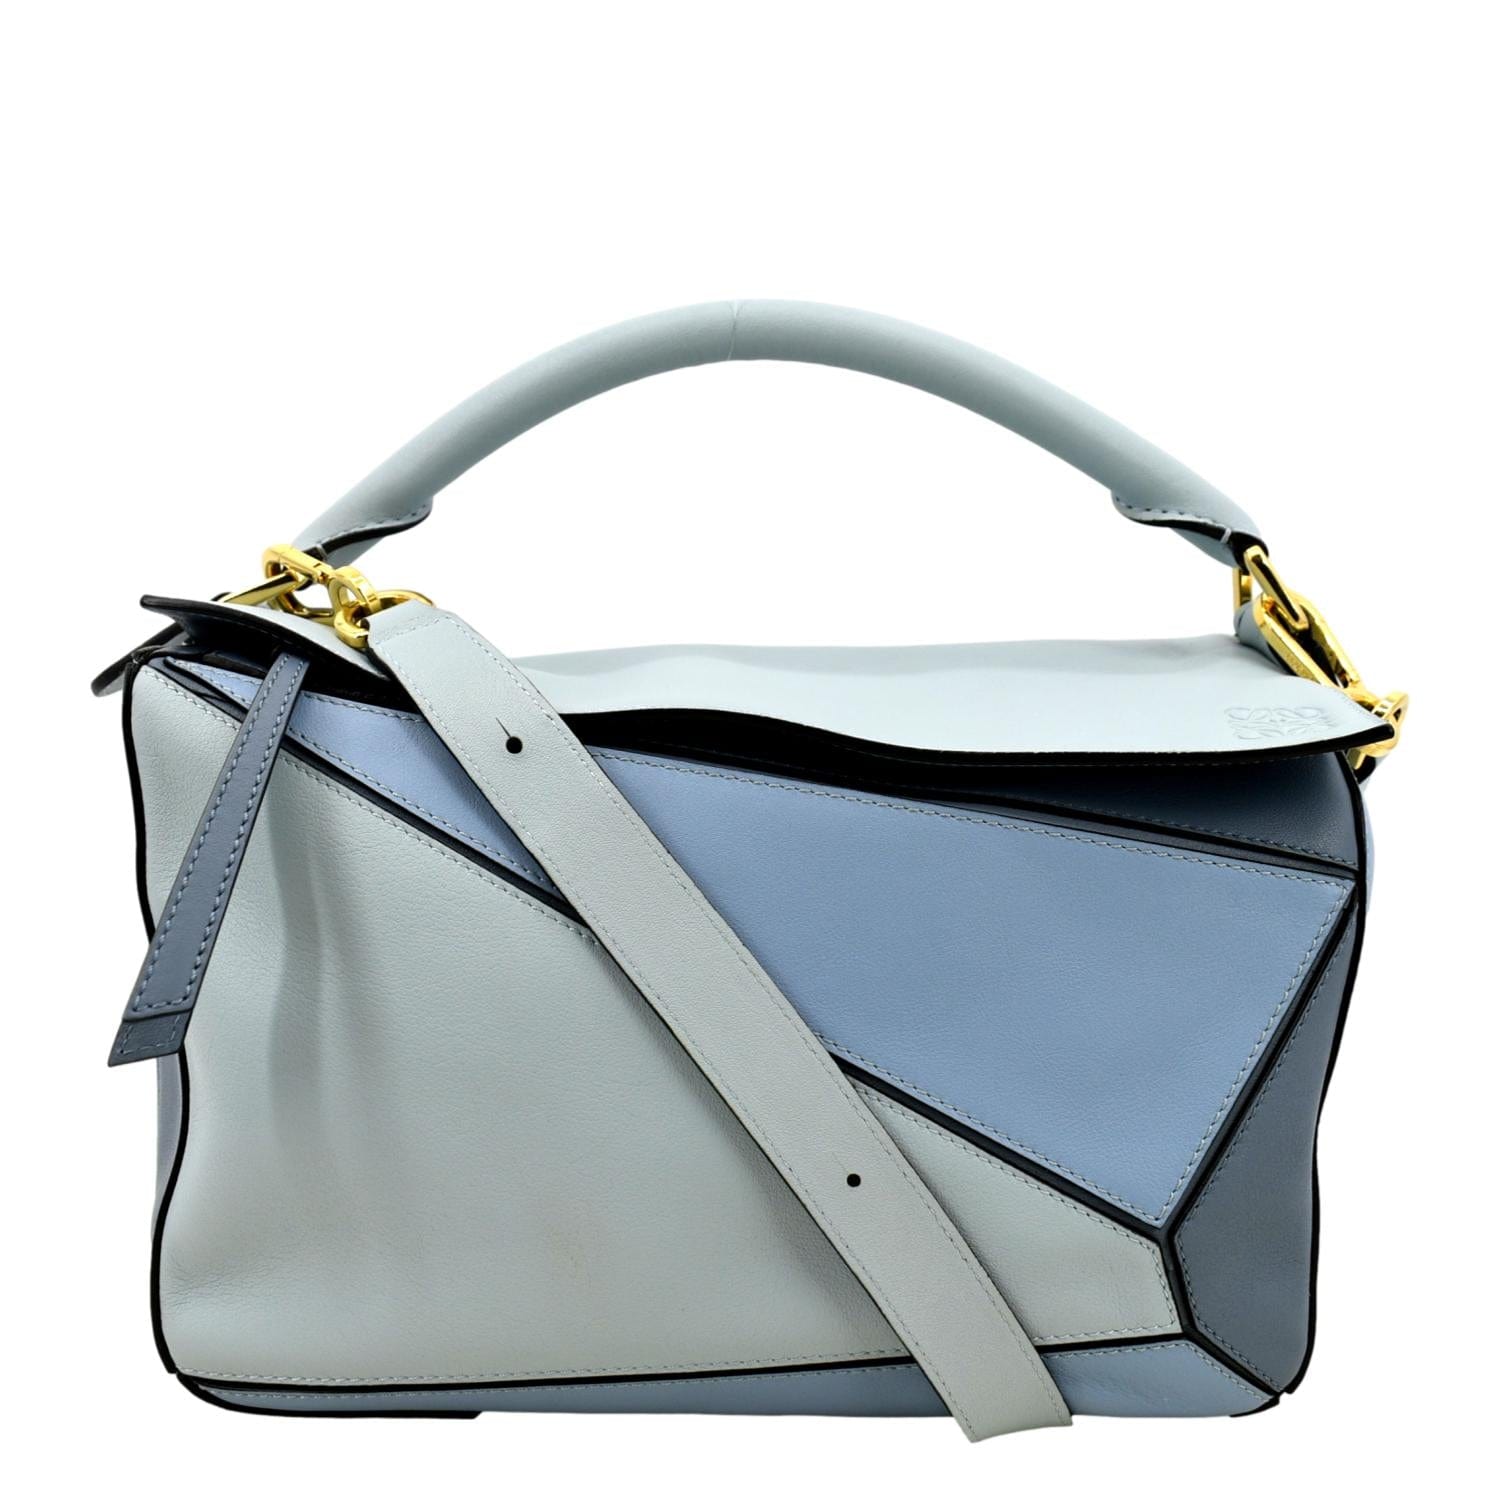 The Loewe Puzzle Bag is the ultimate It bag